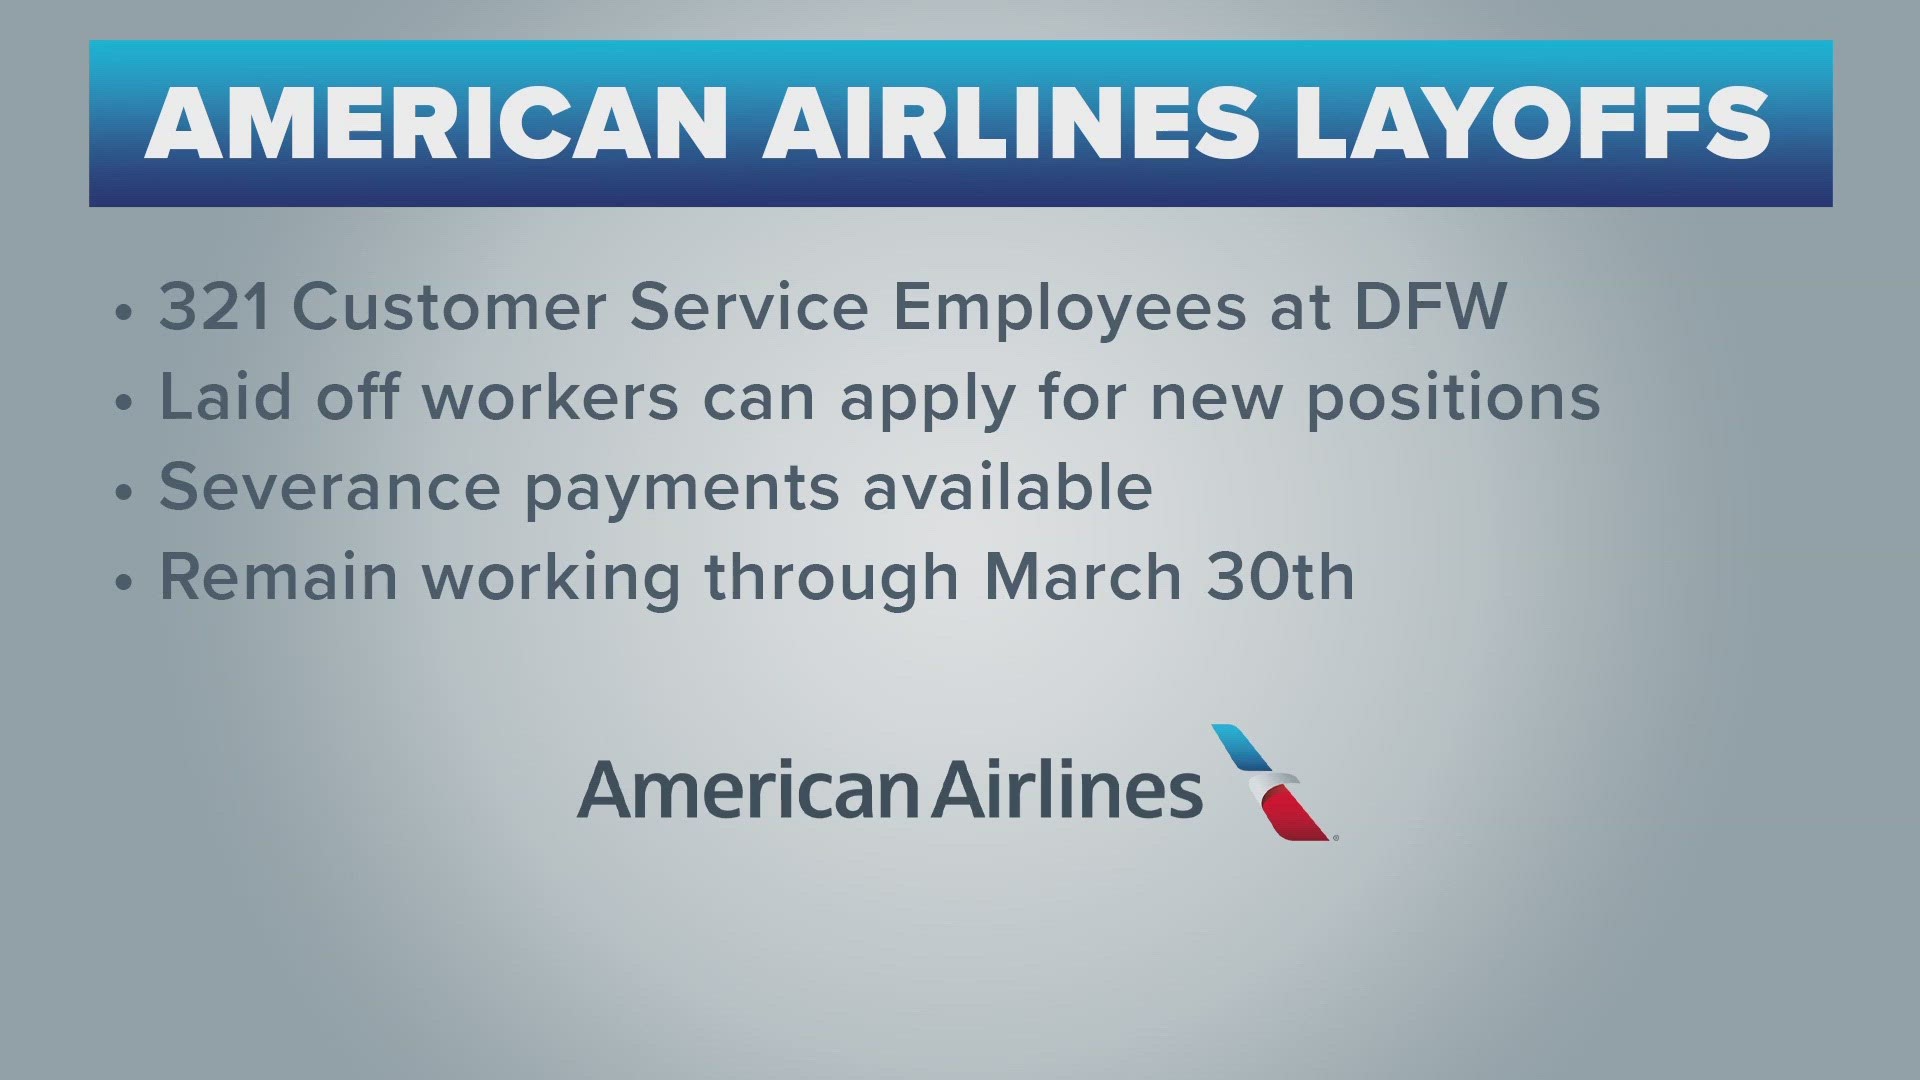 The Fort Worth-based airline says it will retain the employees until March 30.